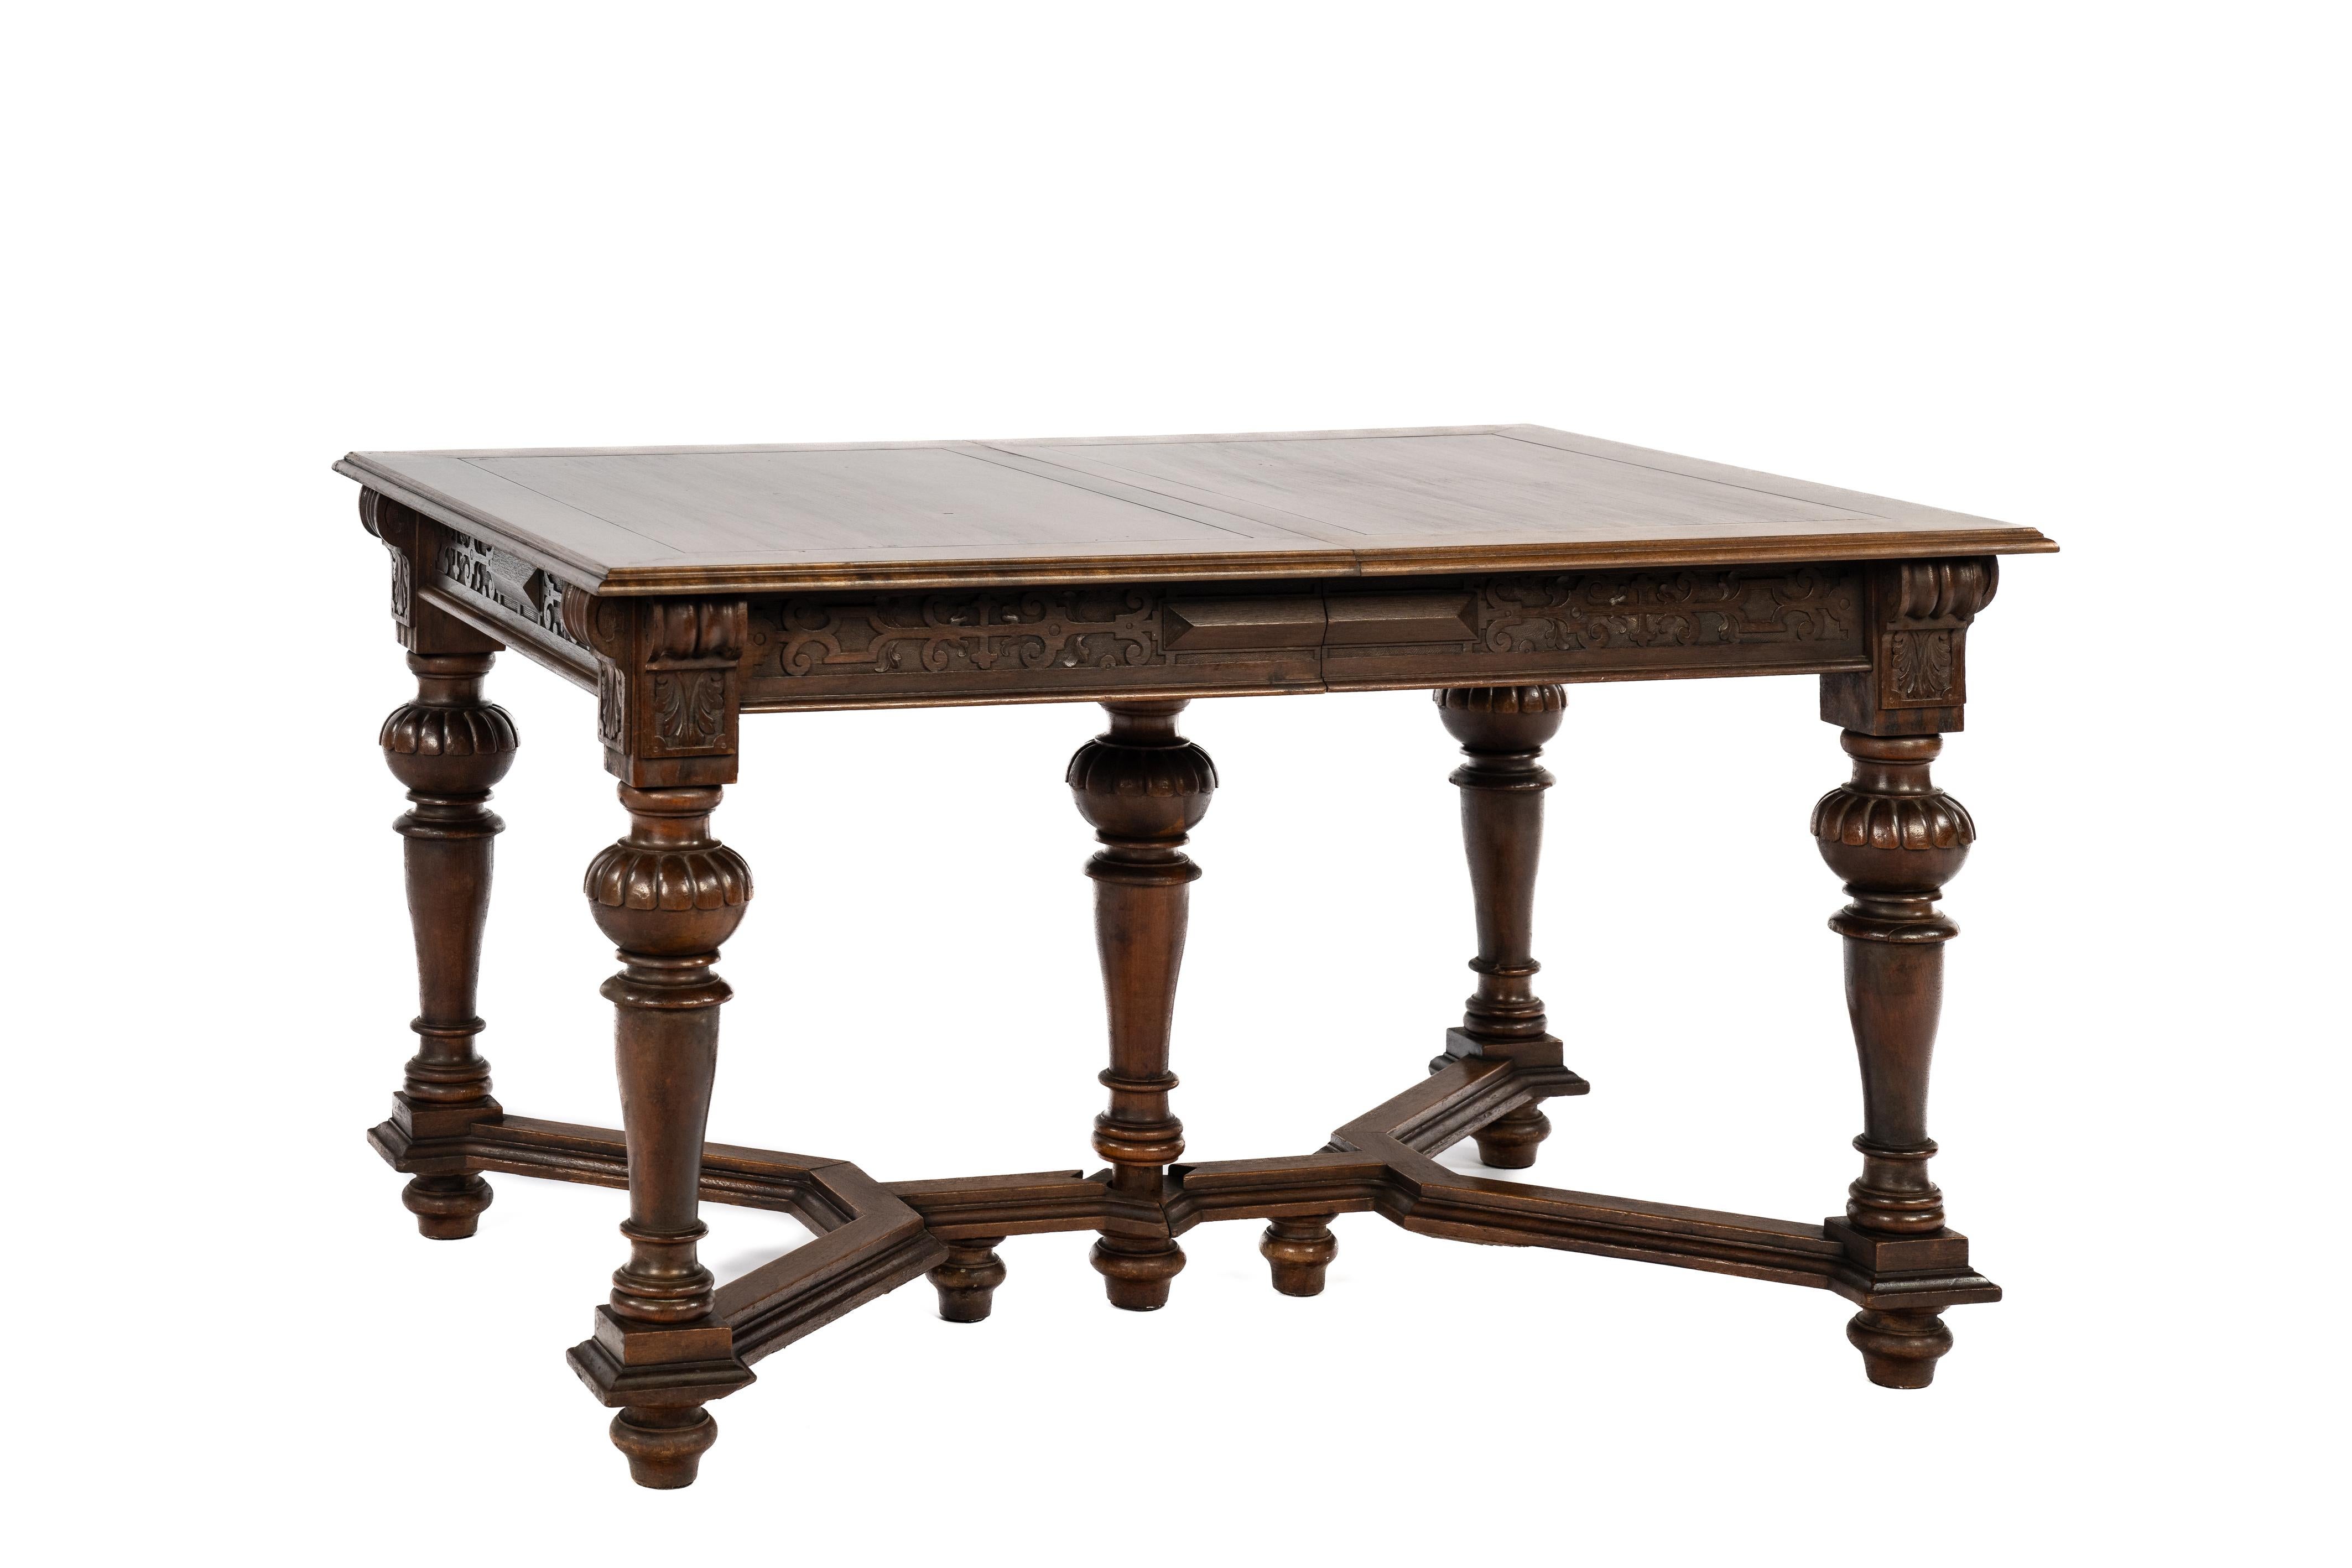 Offered here is an antique draw-leaf table made in France around 1870. The table is entirely crafted in cherry wood and is richly adorned with classical ornaments originating from the Renaissance period. The stylized acanthus motifs, the geometric